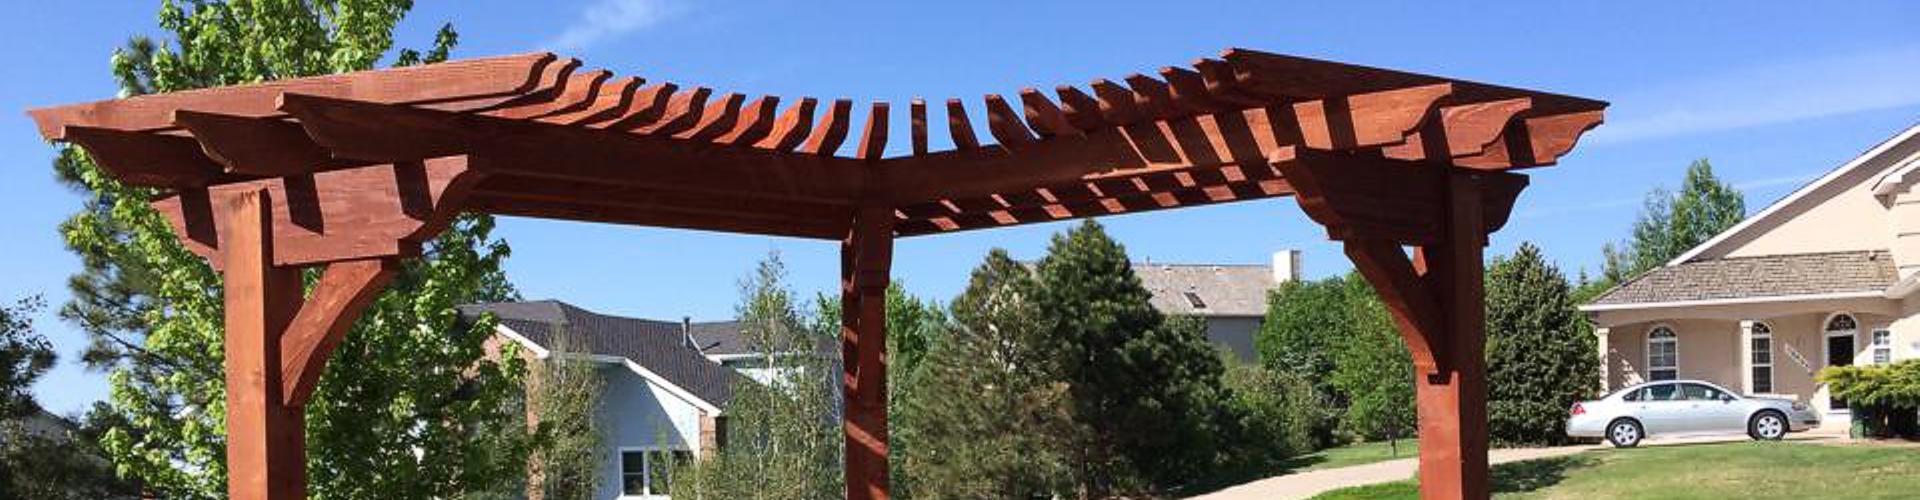 Custom Outdoor Structures by Colorado Springs Deck & Fence